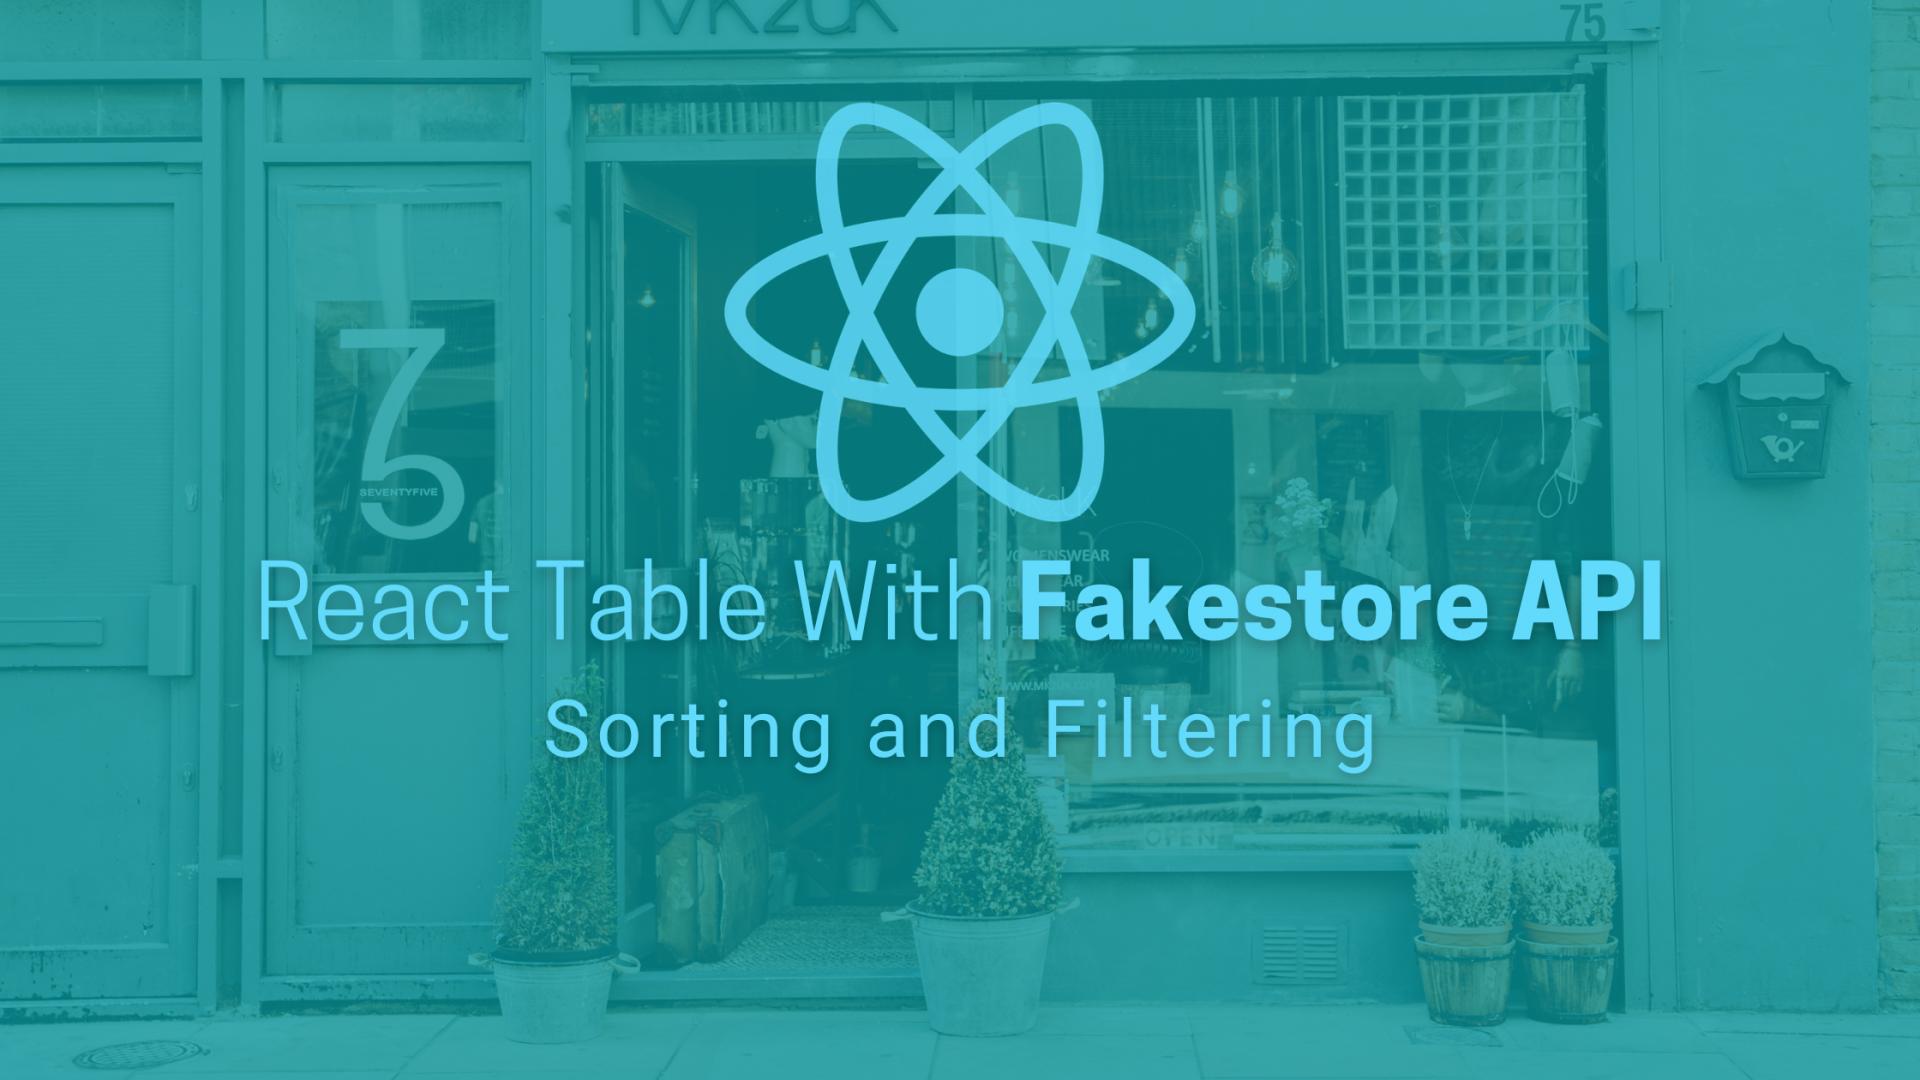 Getting Started With React Table With Fakestore API #2 : Sorting and Filtering